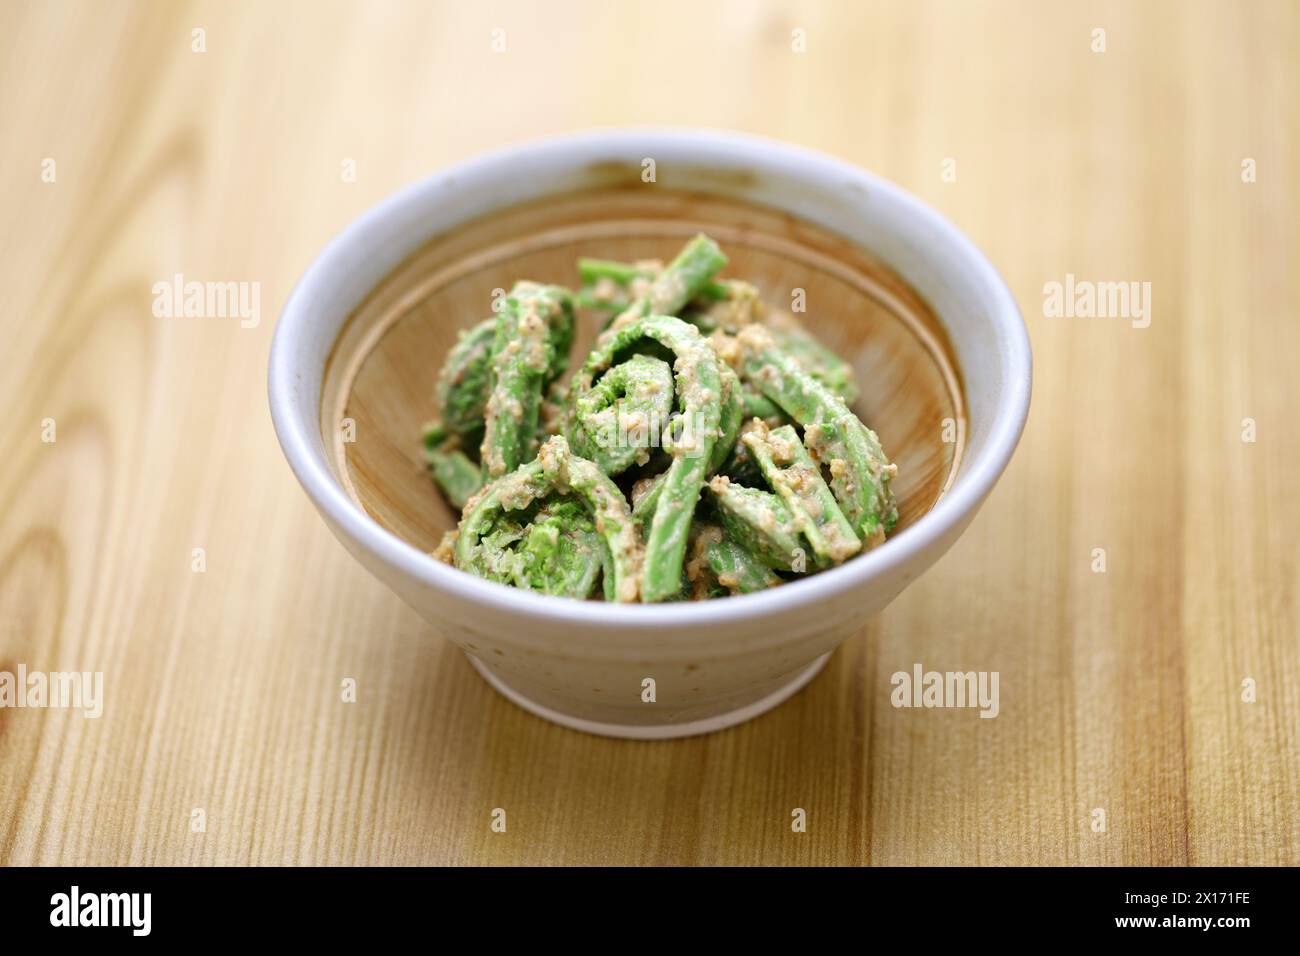 boiled fiddlehead (Ostrich fern) tossed with walnut dressing, Japanese cuisine Stock Photo